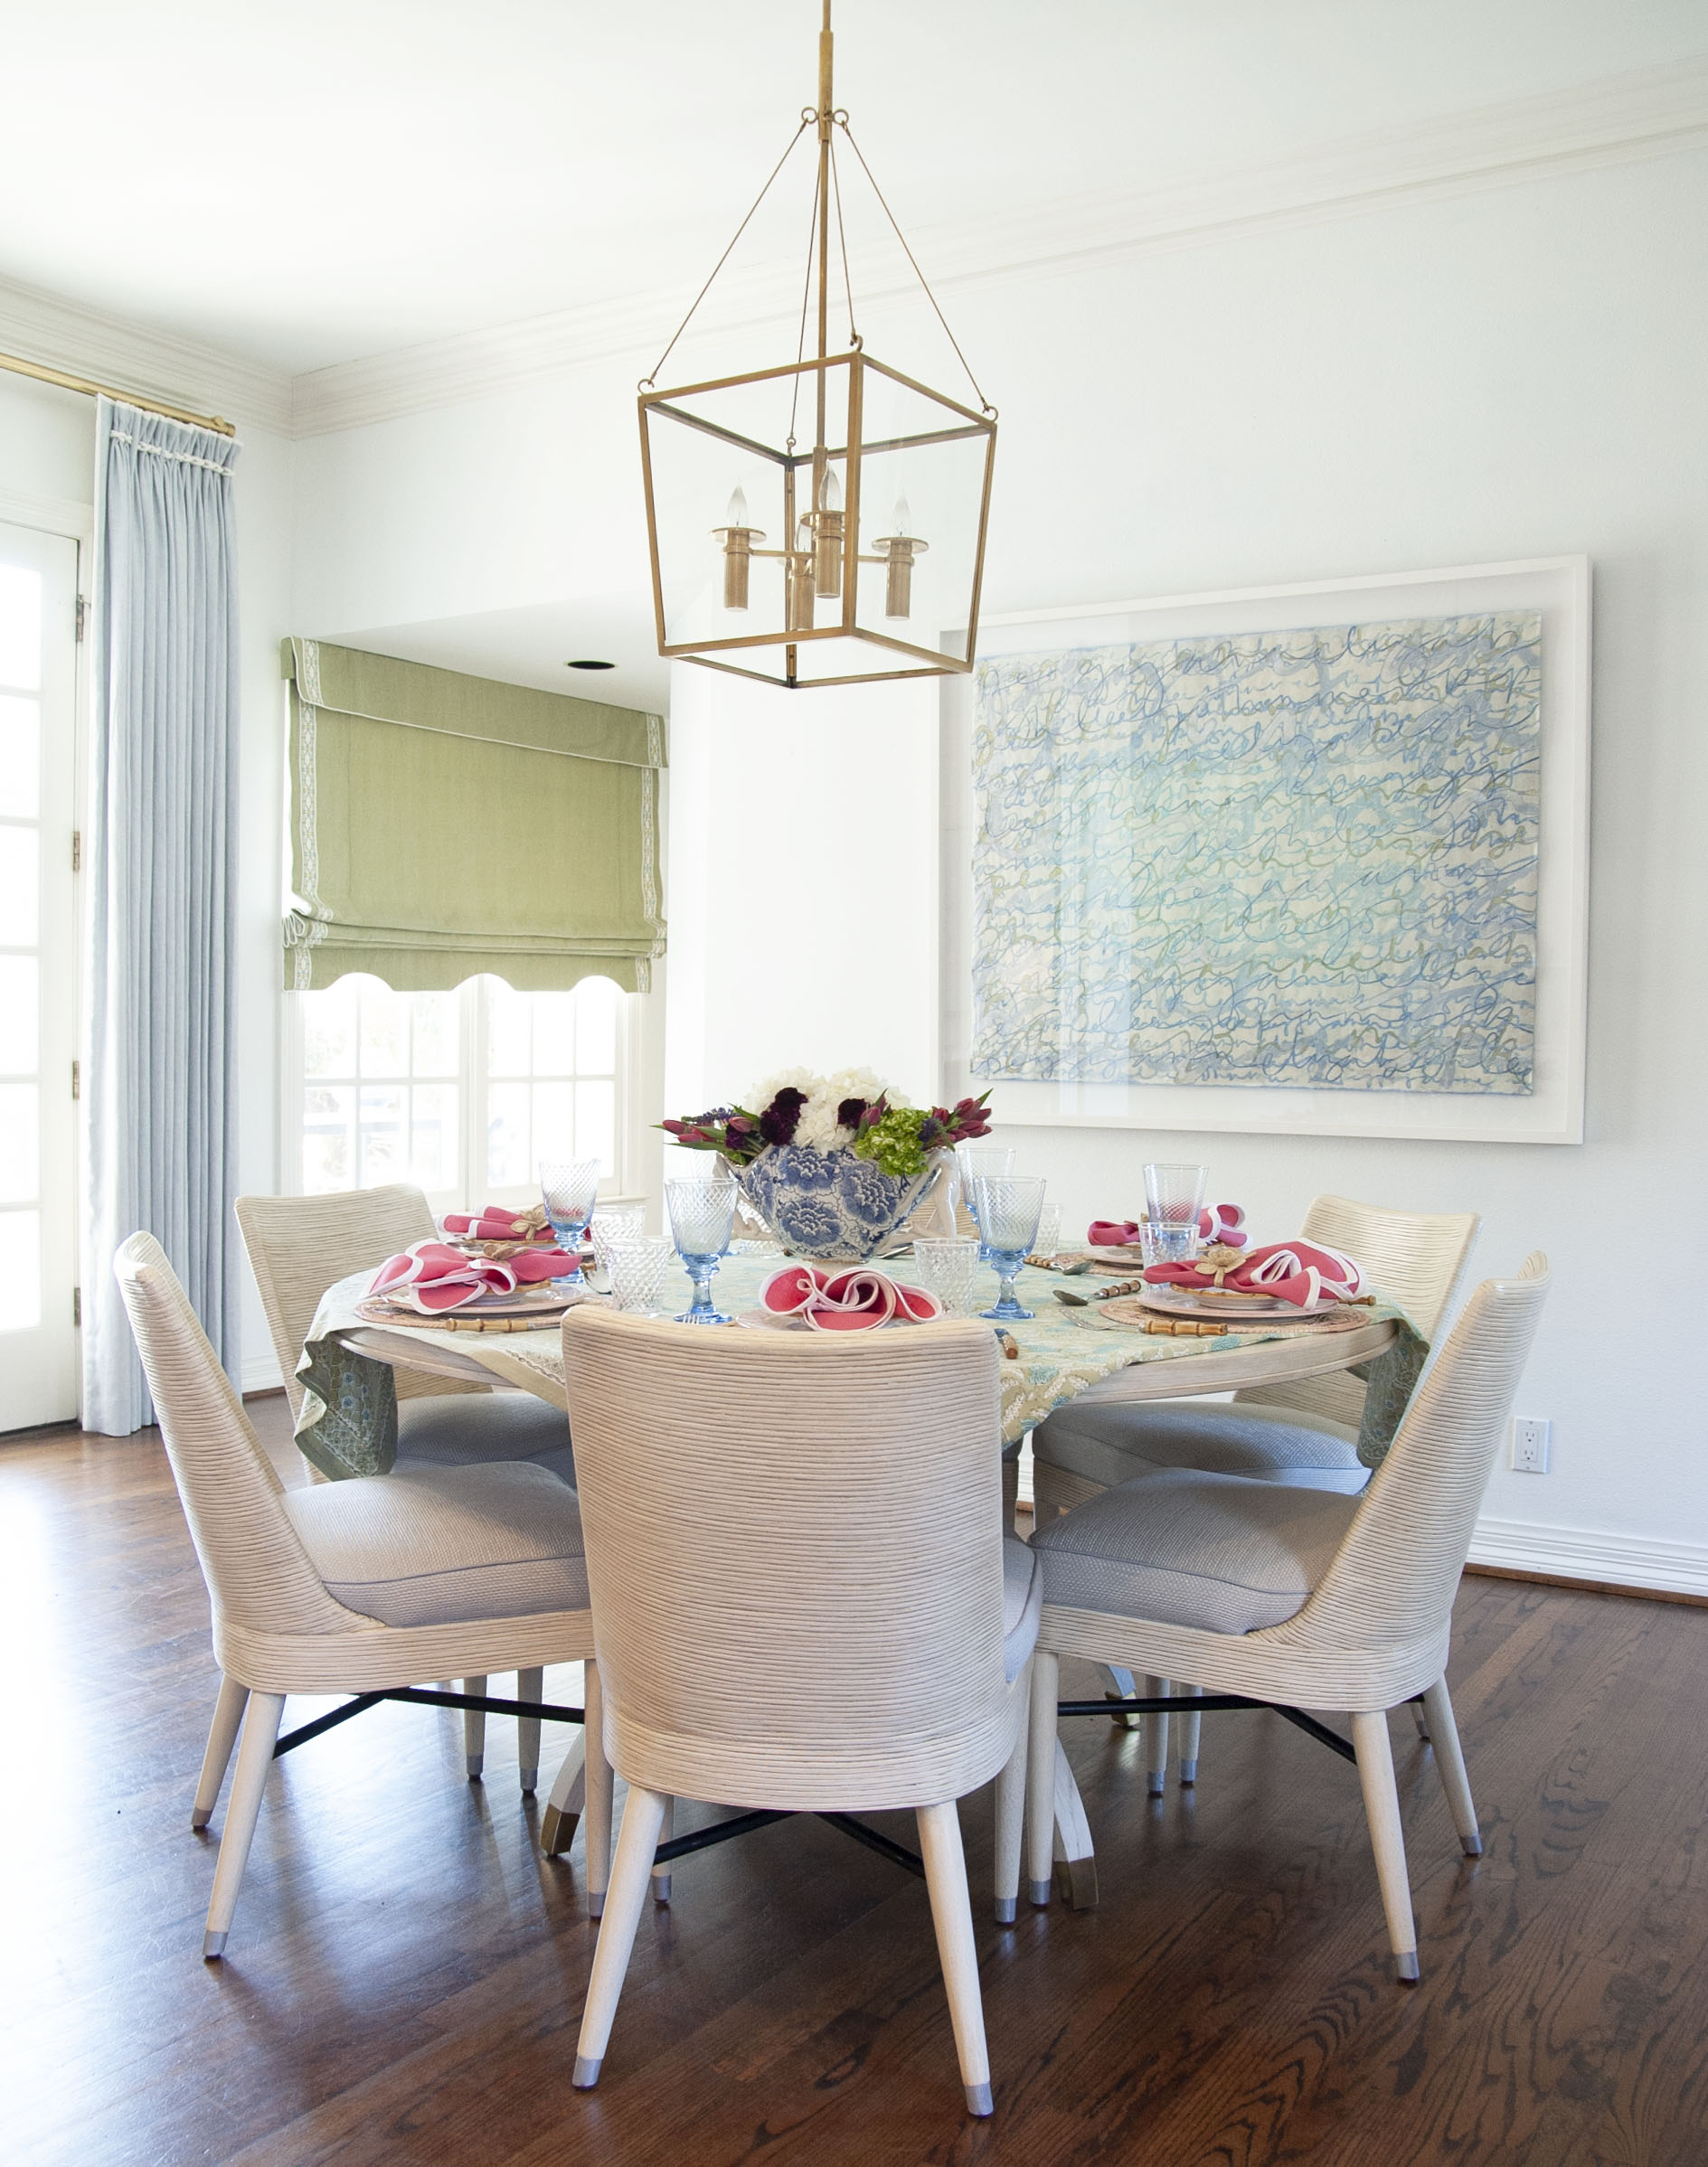 Dining table photo with ceiling fixture